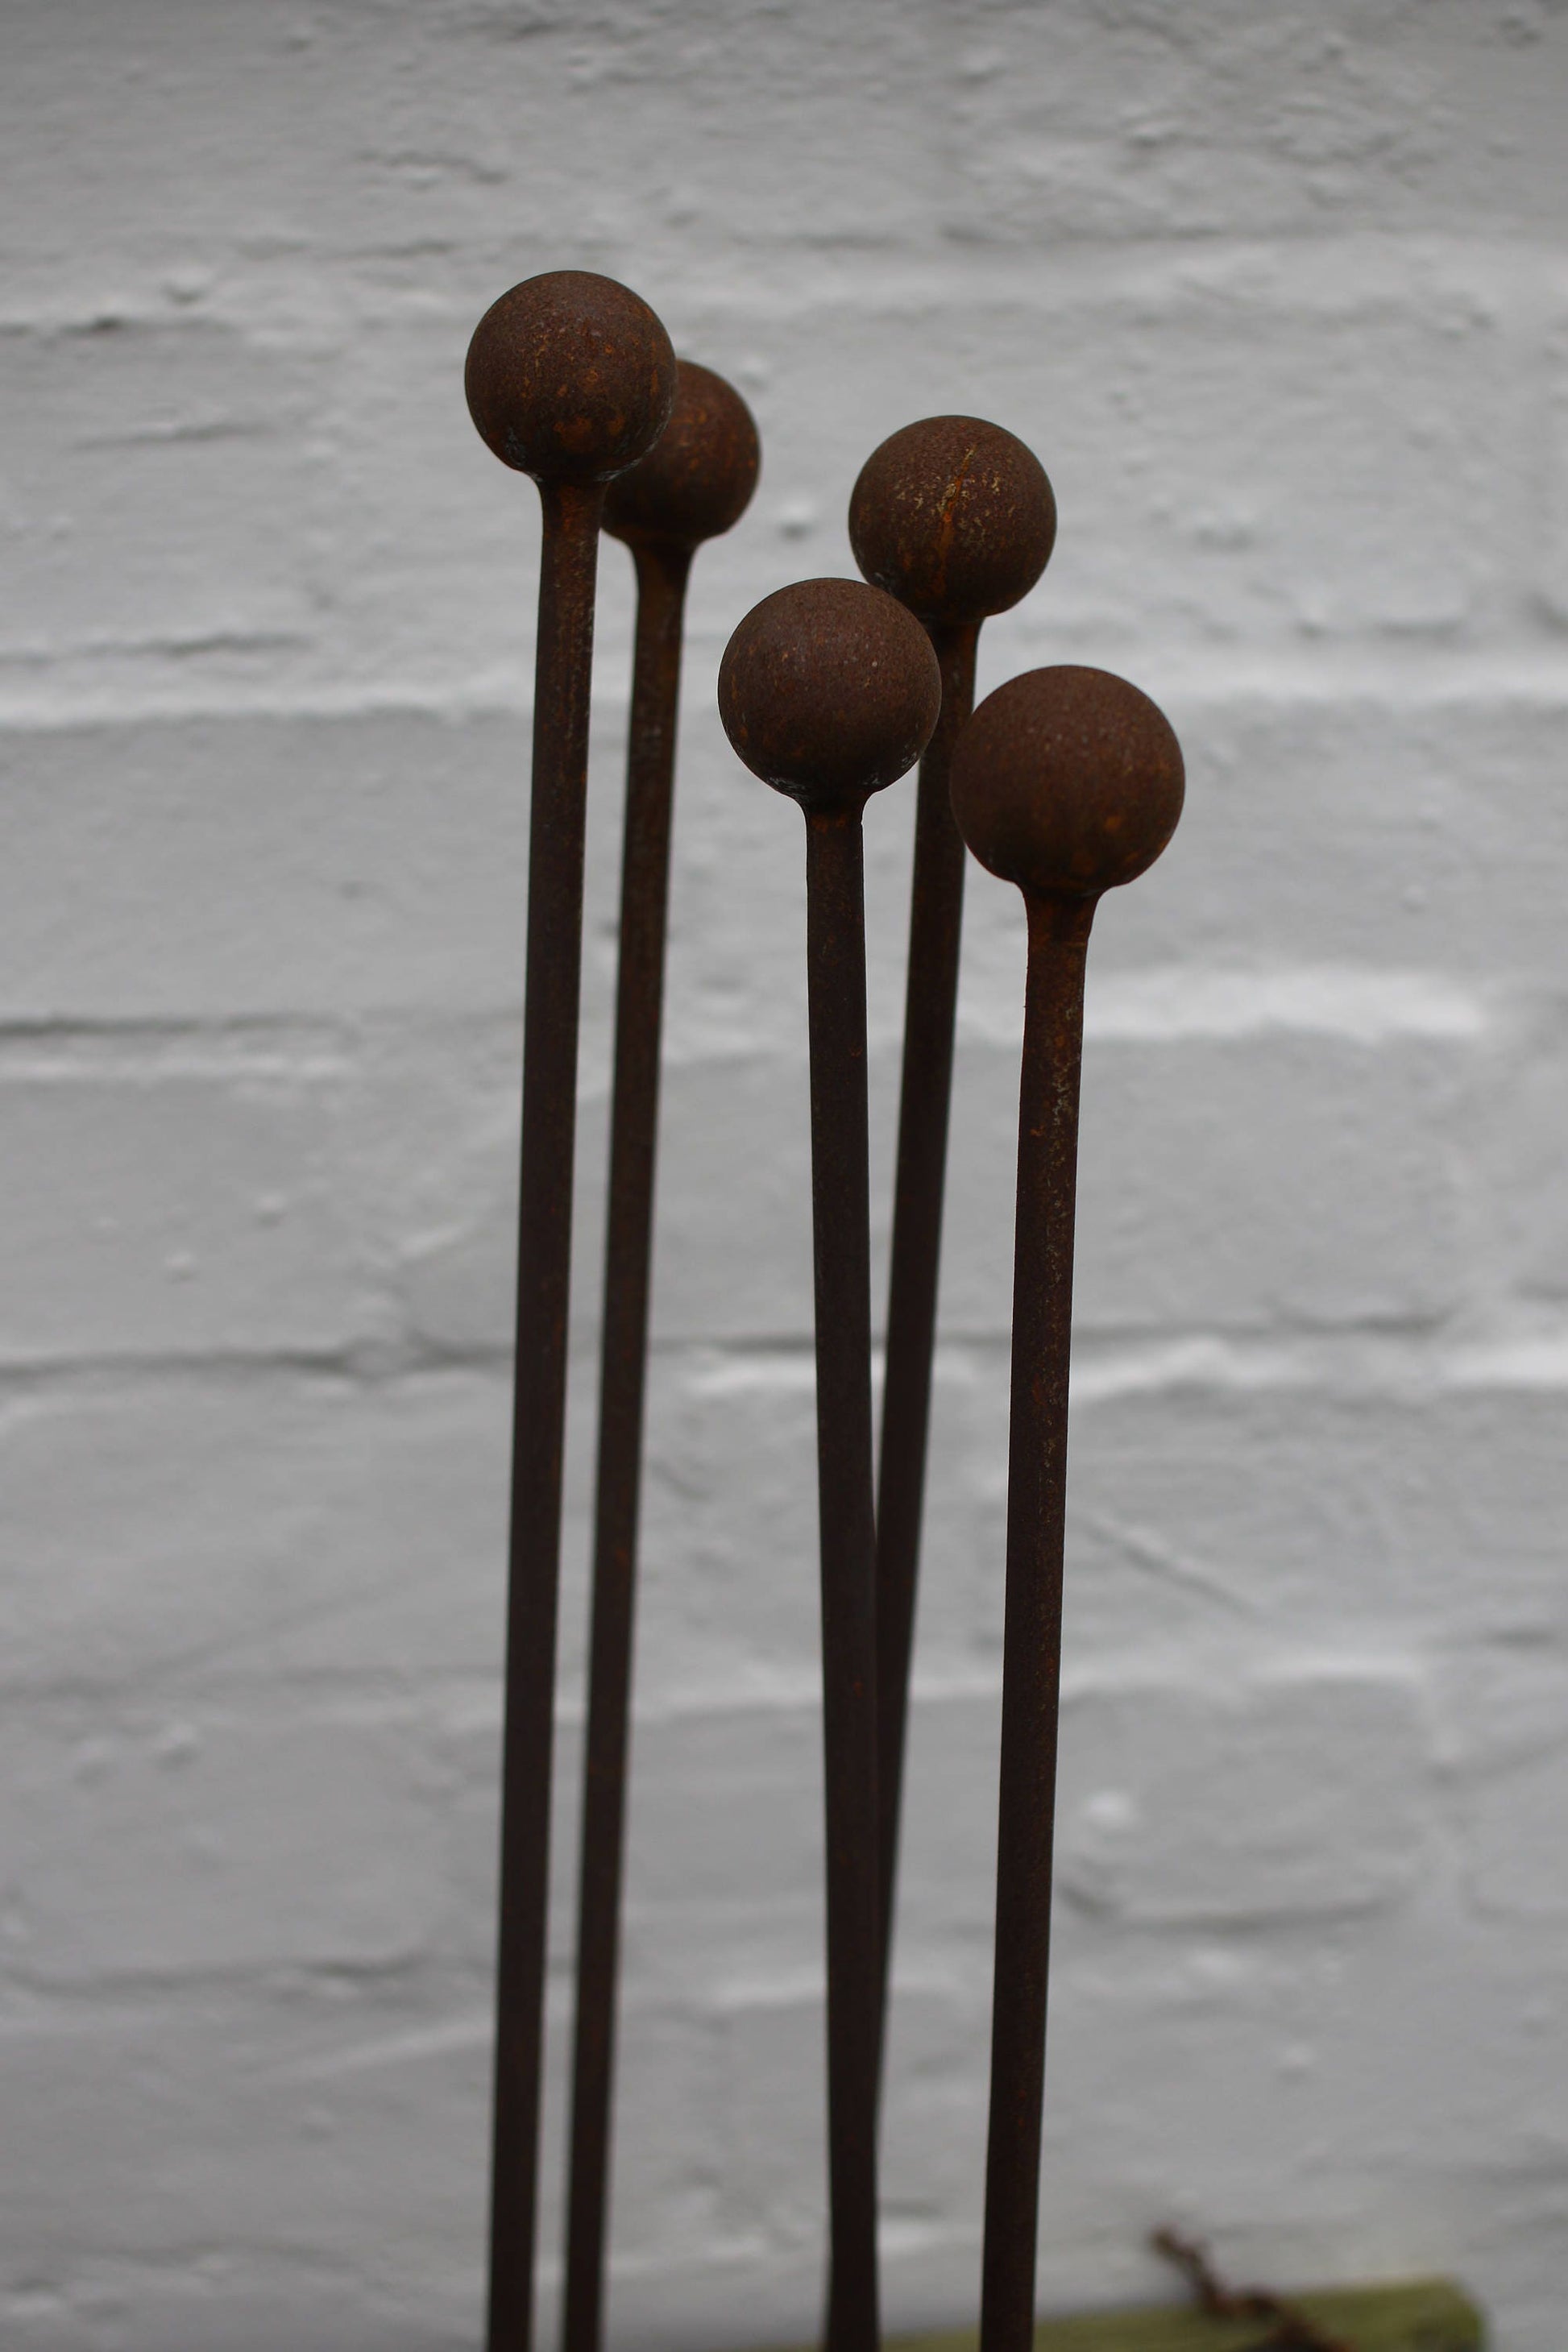 5 X Solid Steel Ball Topped Garden Stake / Support